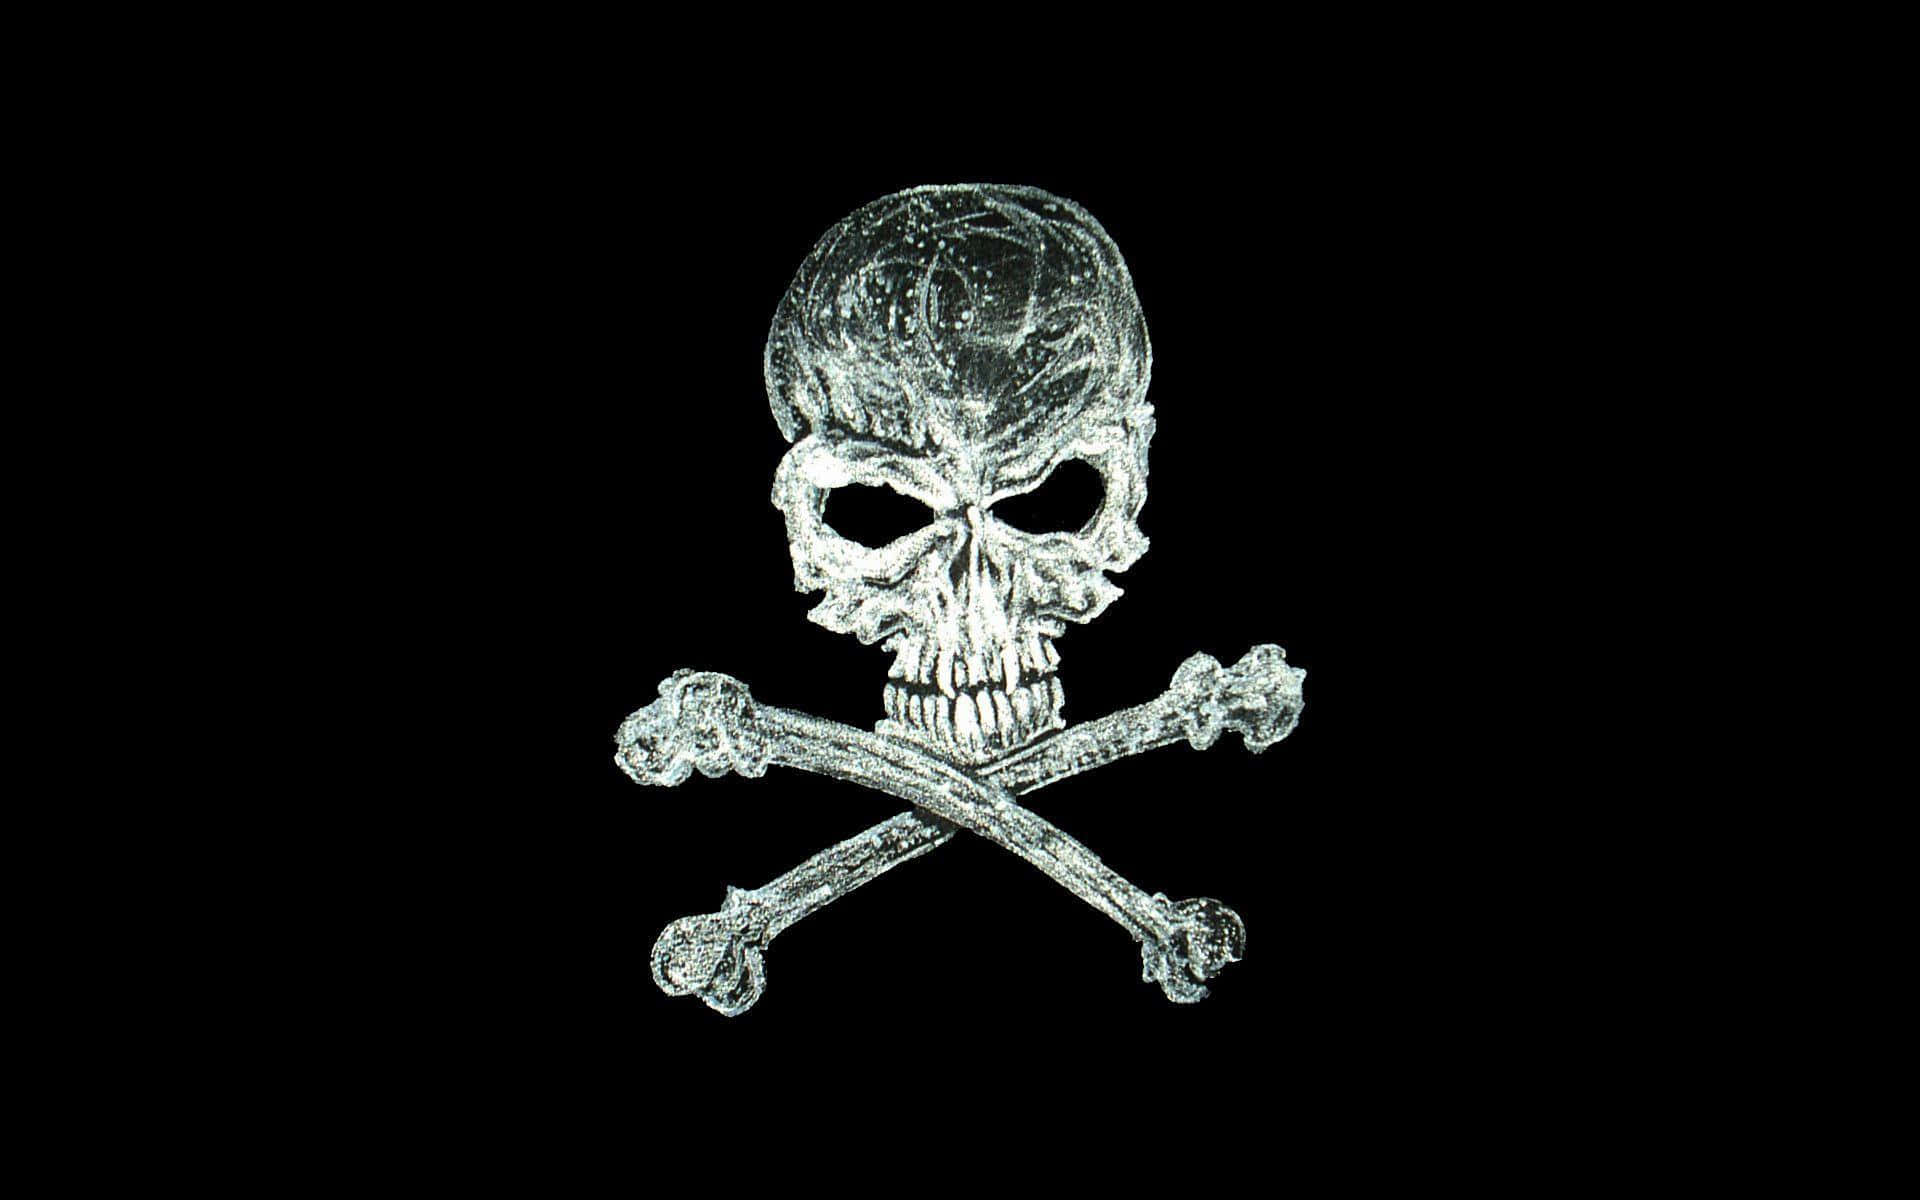 Skull And Crossbones Scary Teeth Background